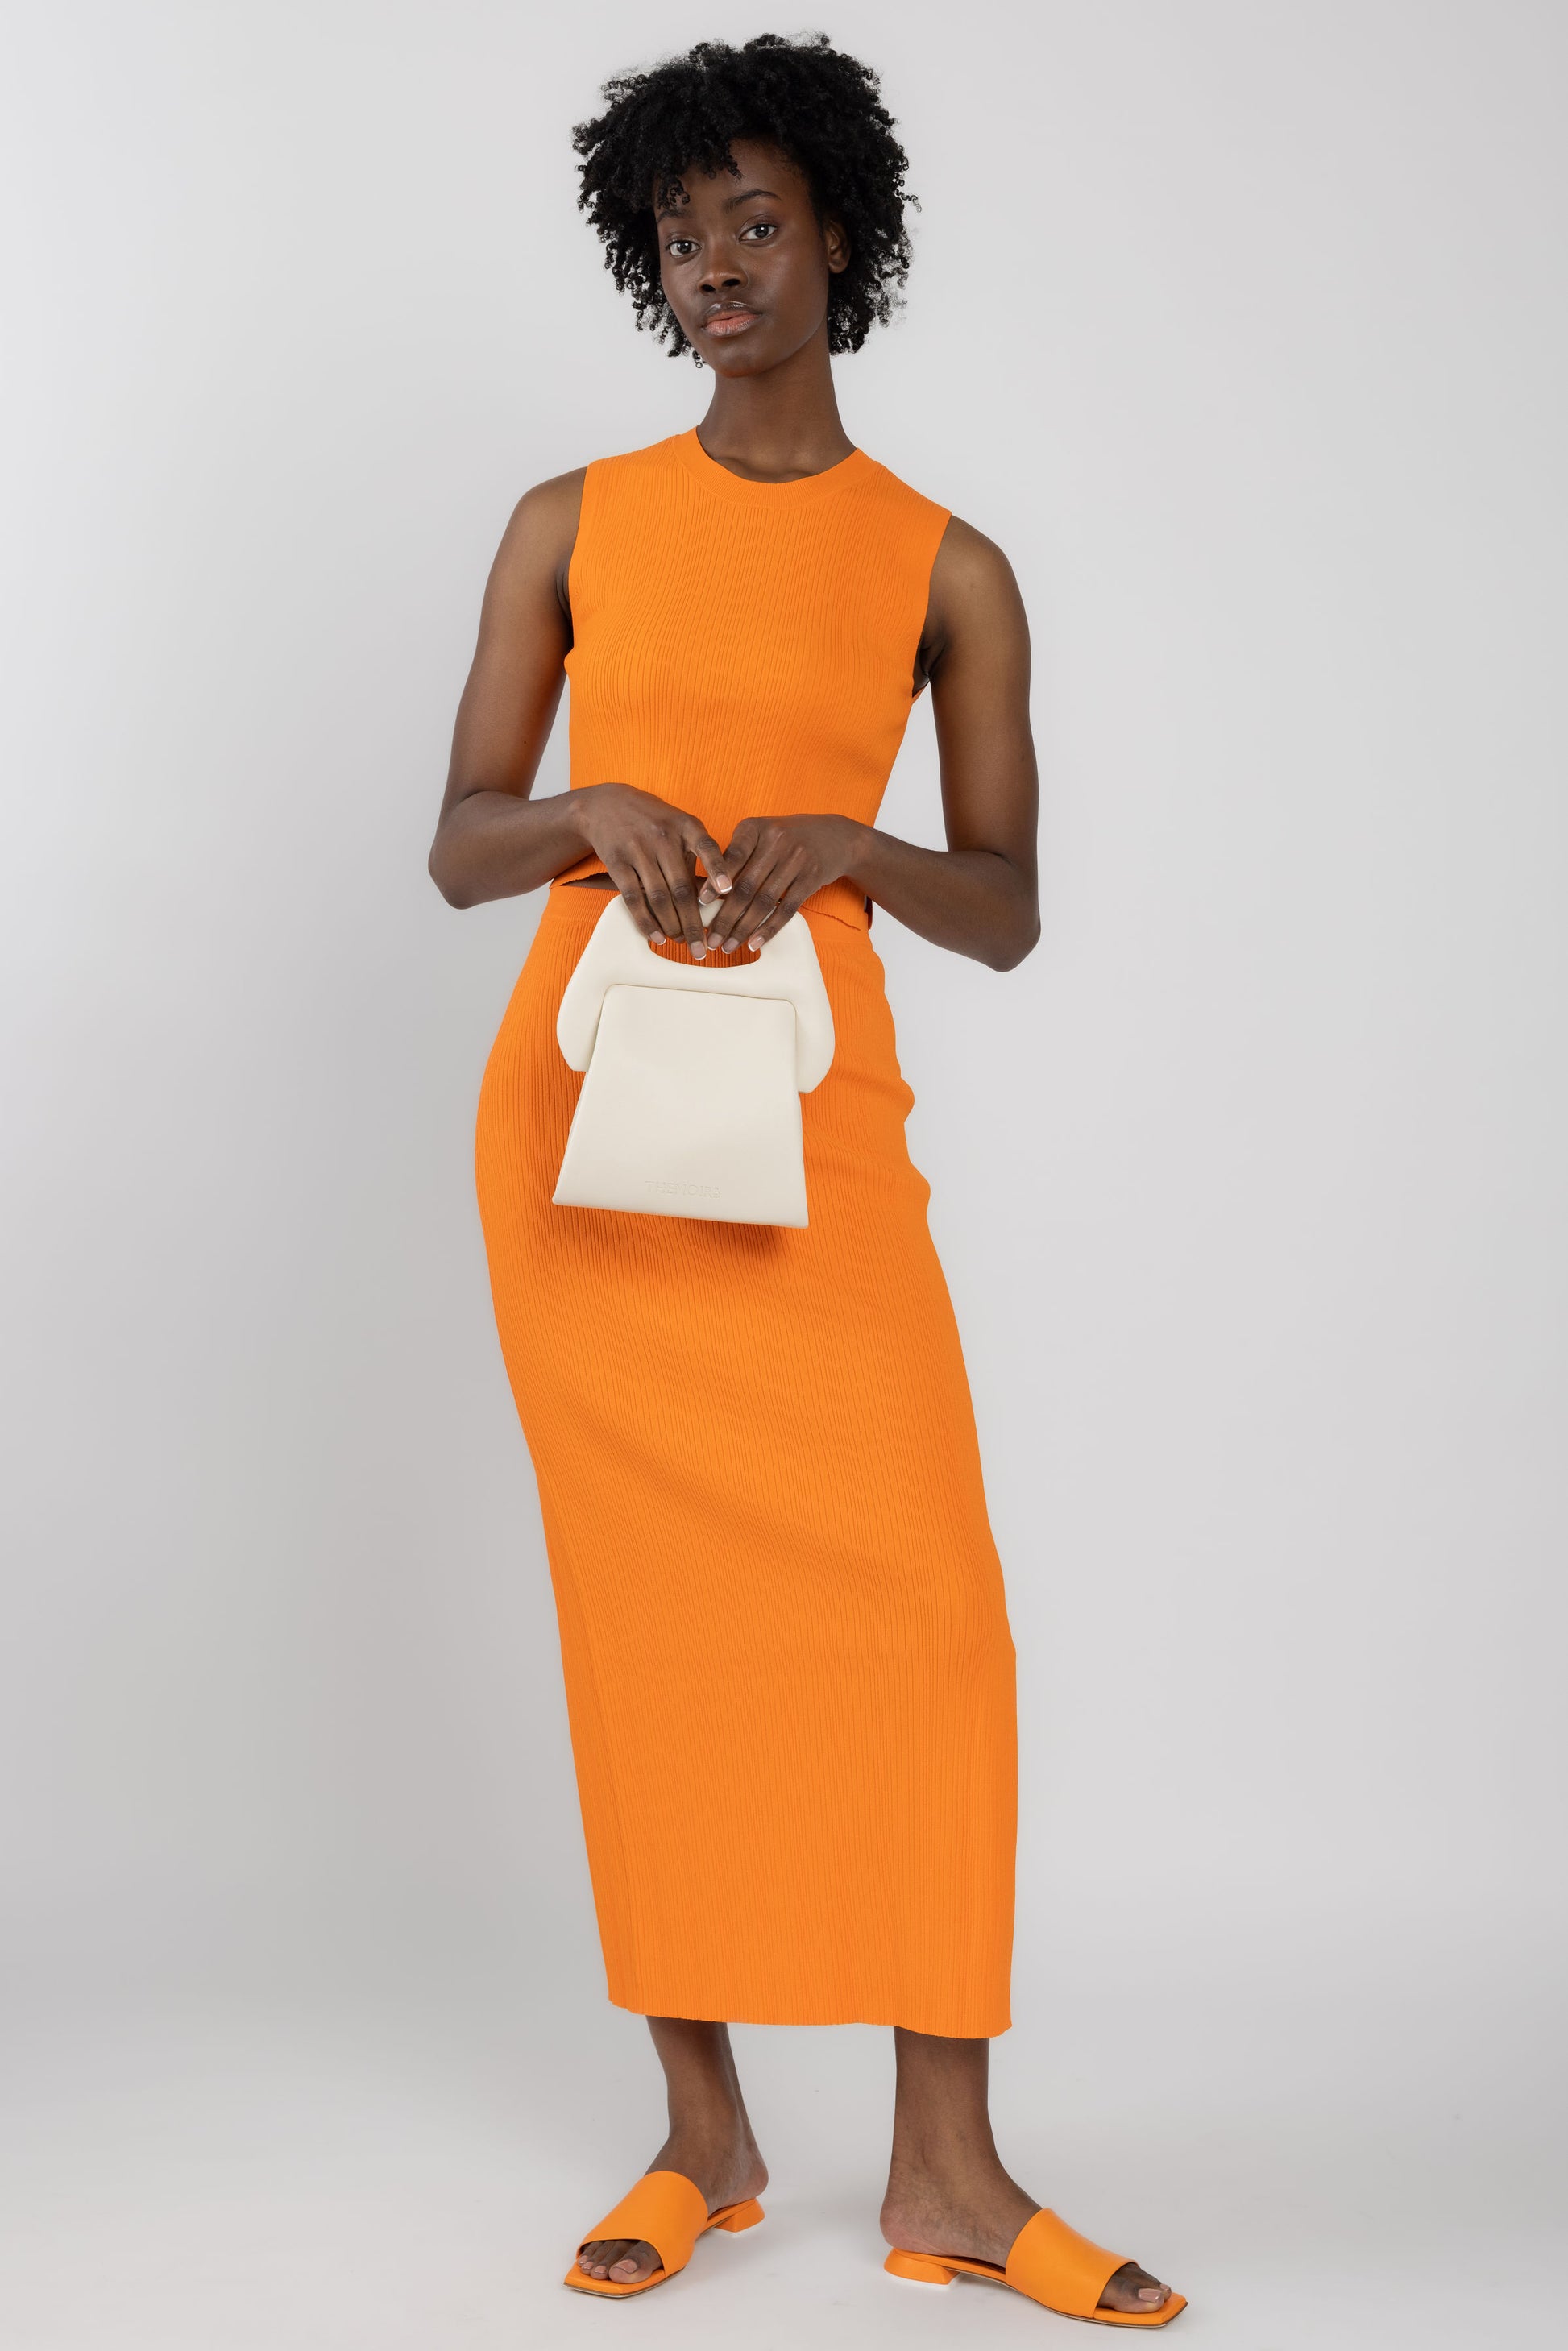 FRAME Mixed Rib Cut Out Skirt in Bright Tangerine